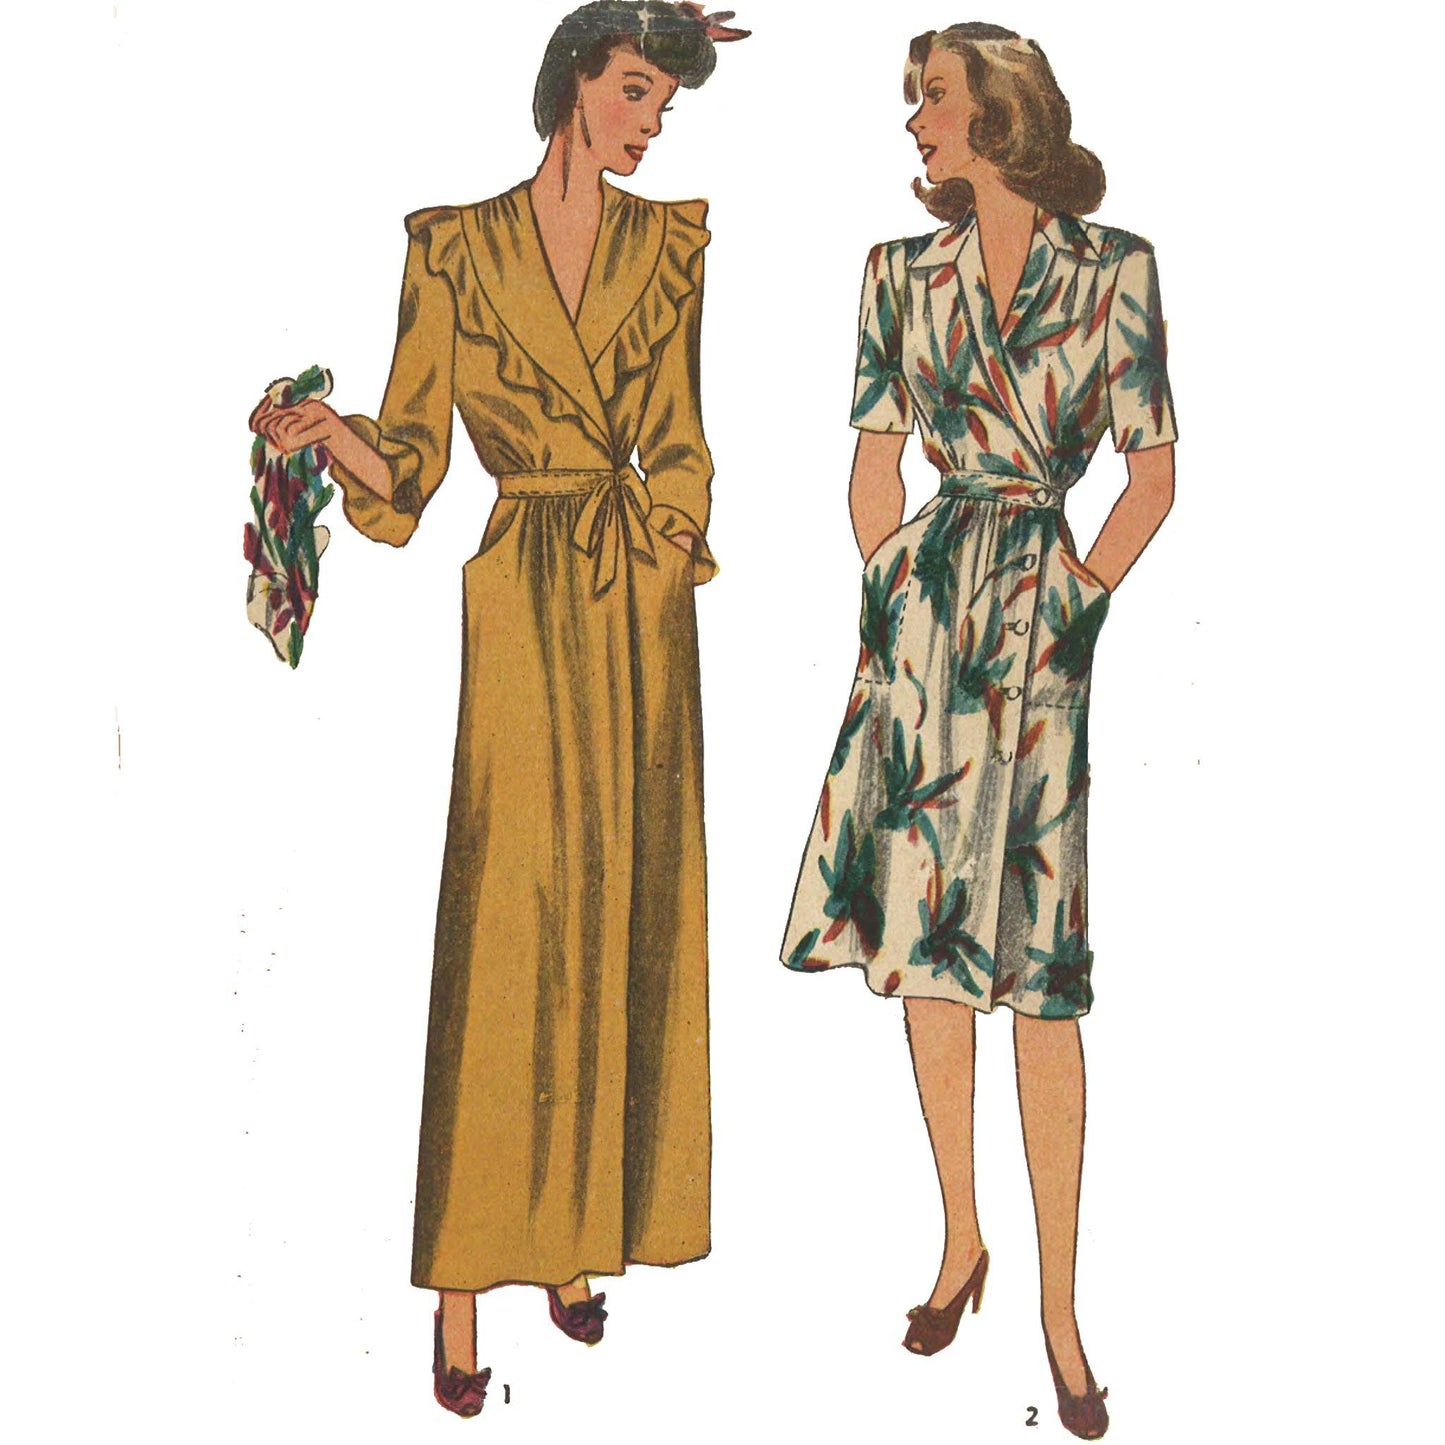 Women wearing housecoats. Left, ankle length, long sleeve robe in mustard yellow, featuring a ruffle trim on the collar edge. Right, knee length, short sleeve robe, in white fabric featuring a red and green abstract pattern.